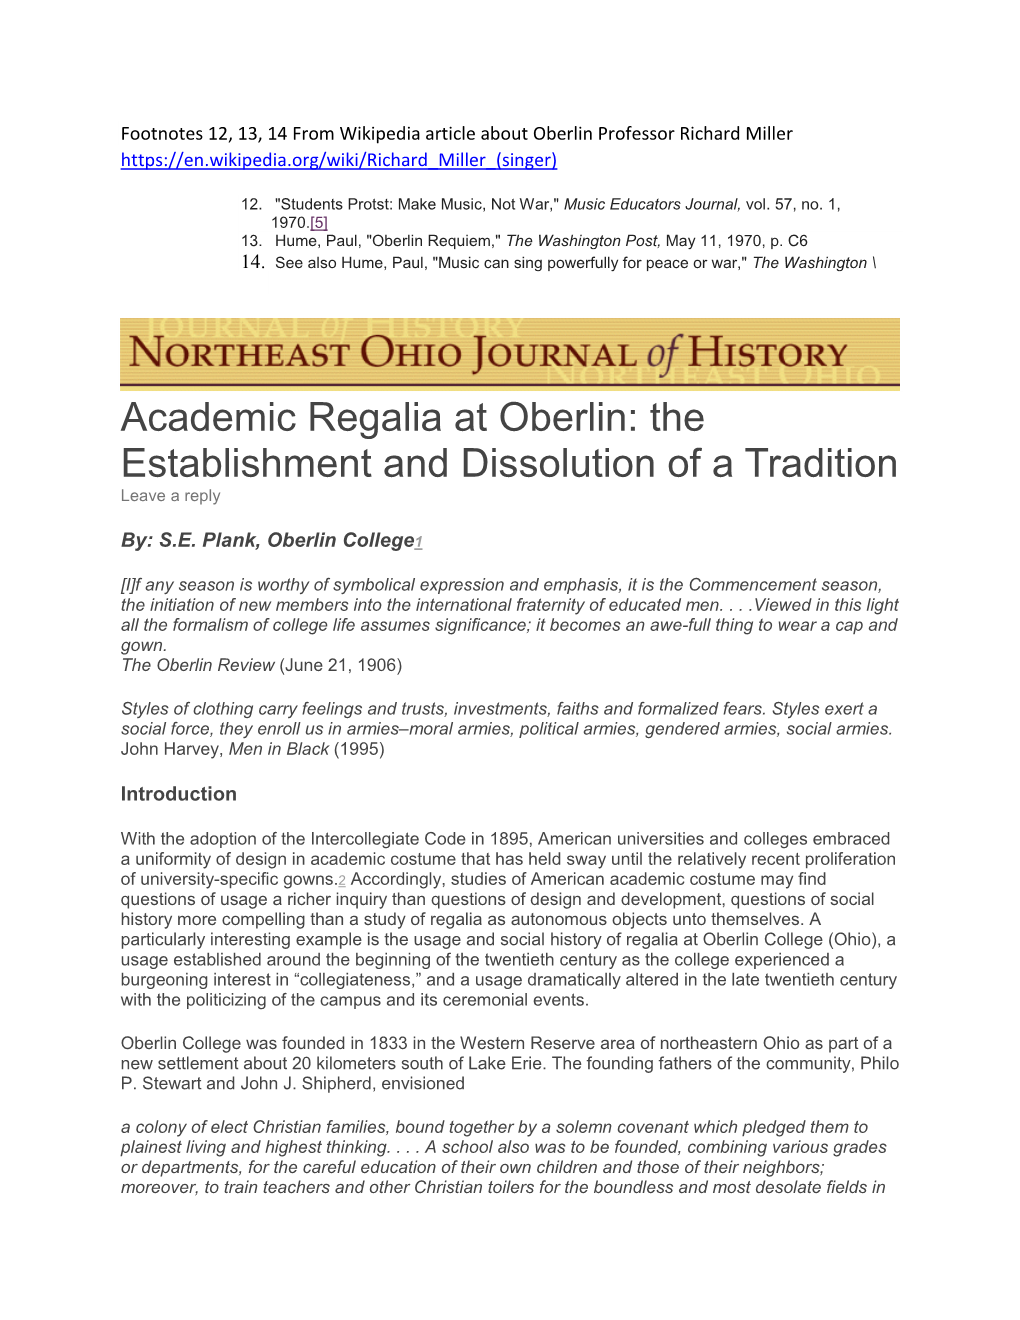 Academic Regalia at Oberlin: the Establishment and Dissolution of a Tradition Leave a Reply